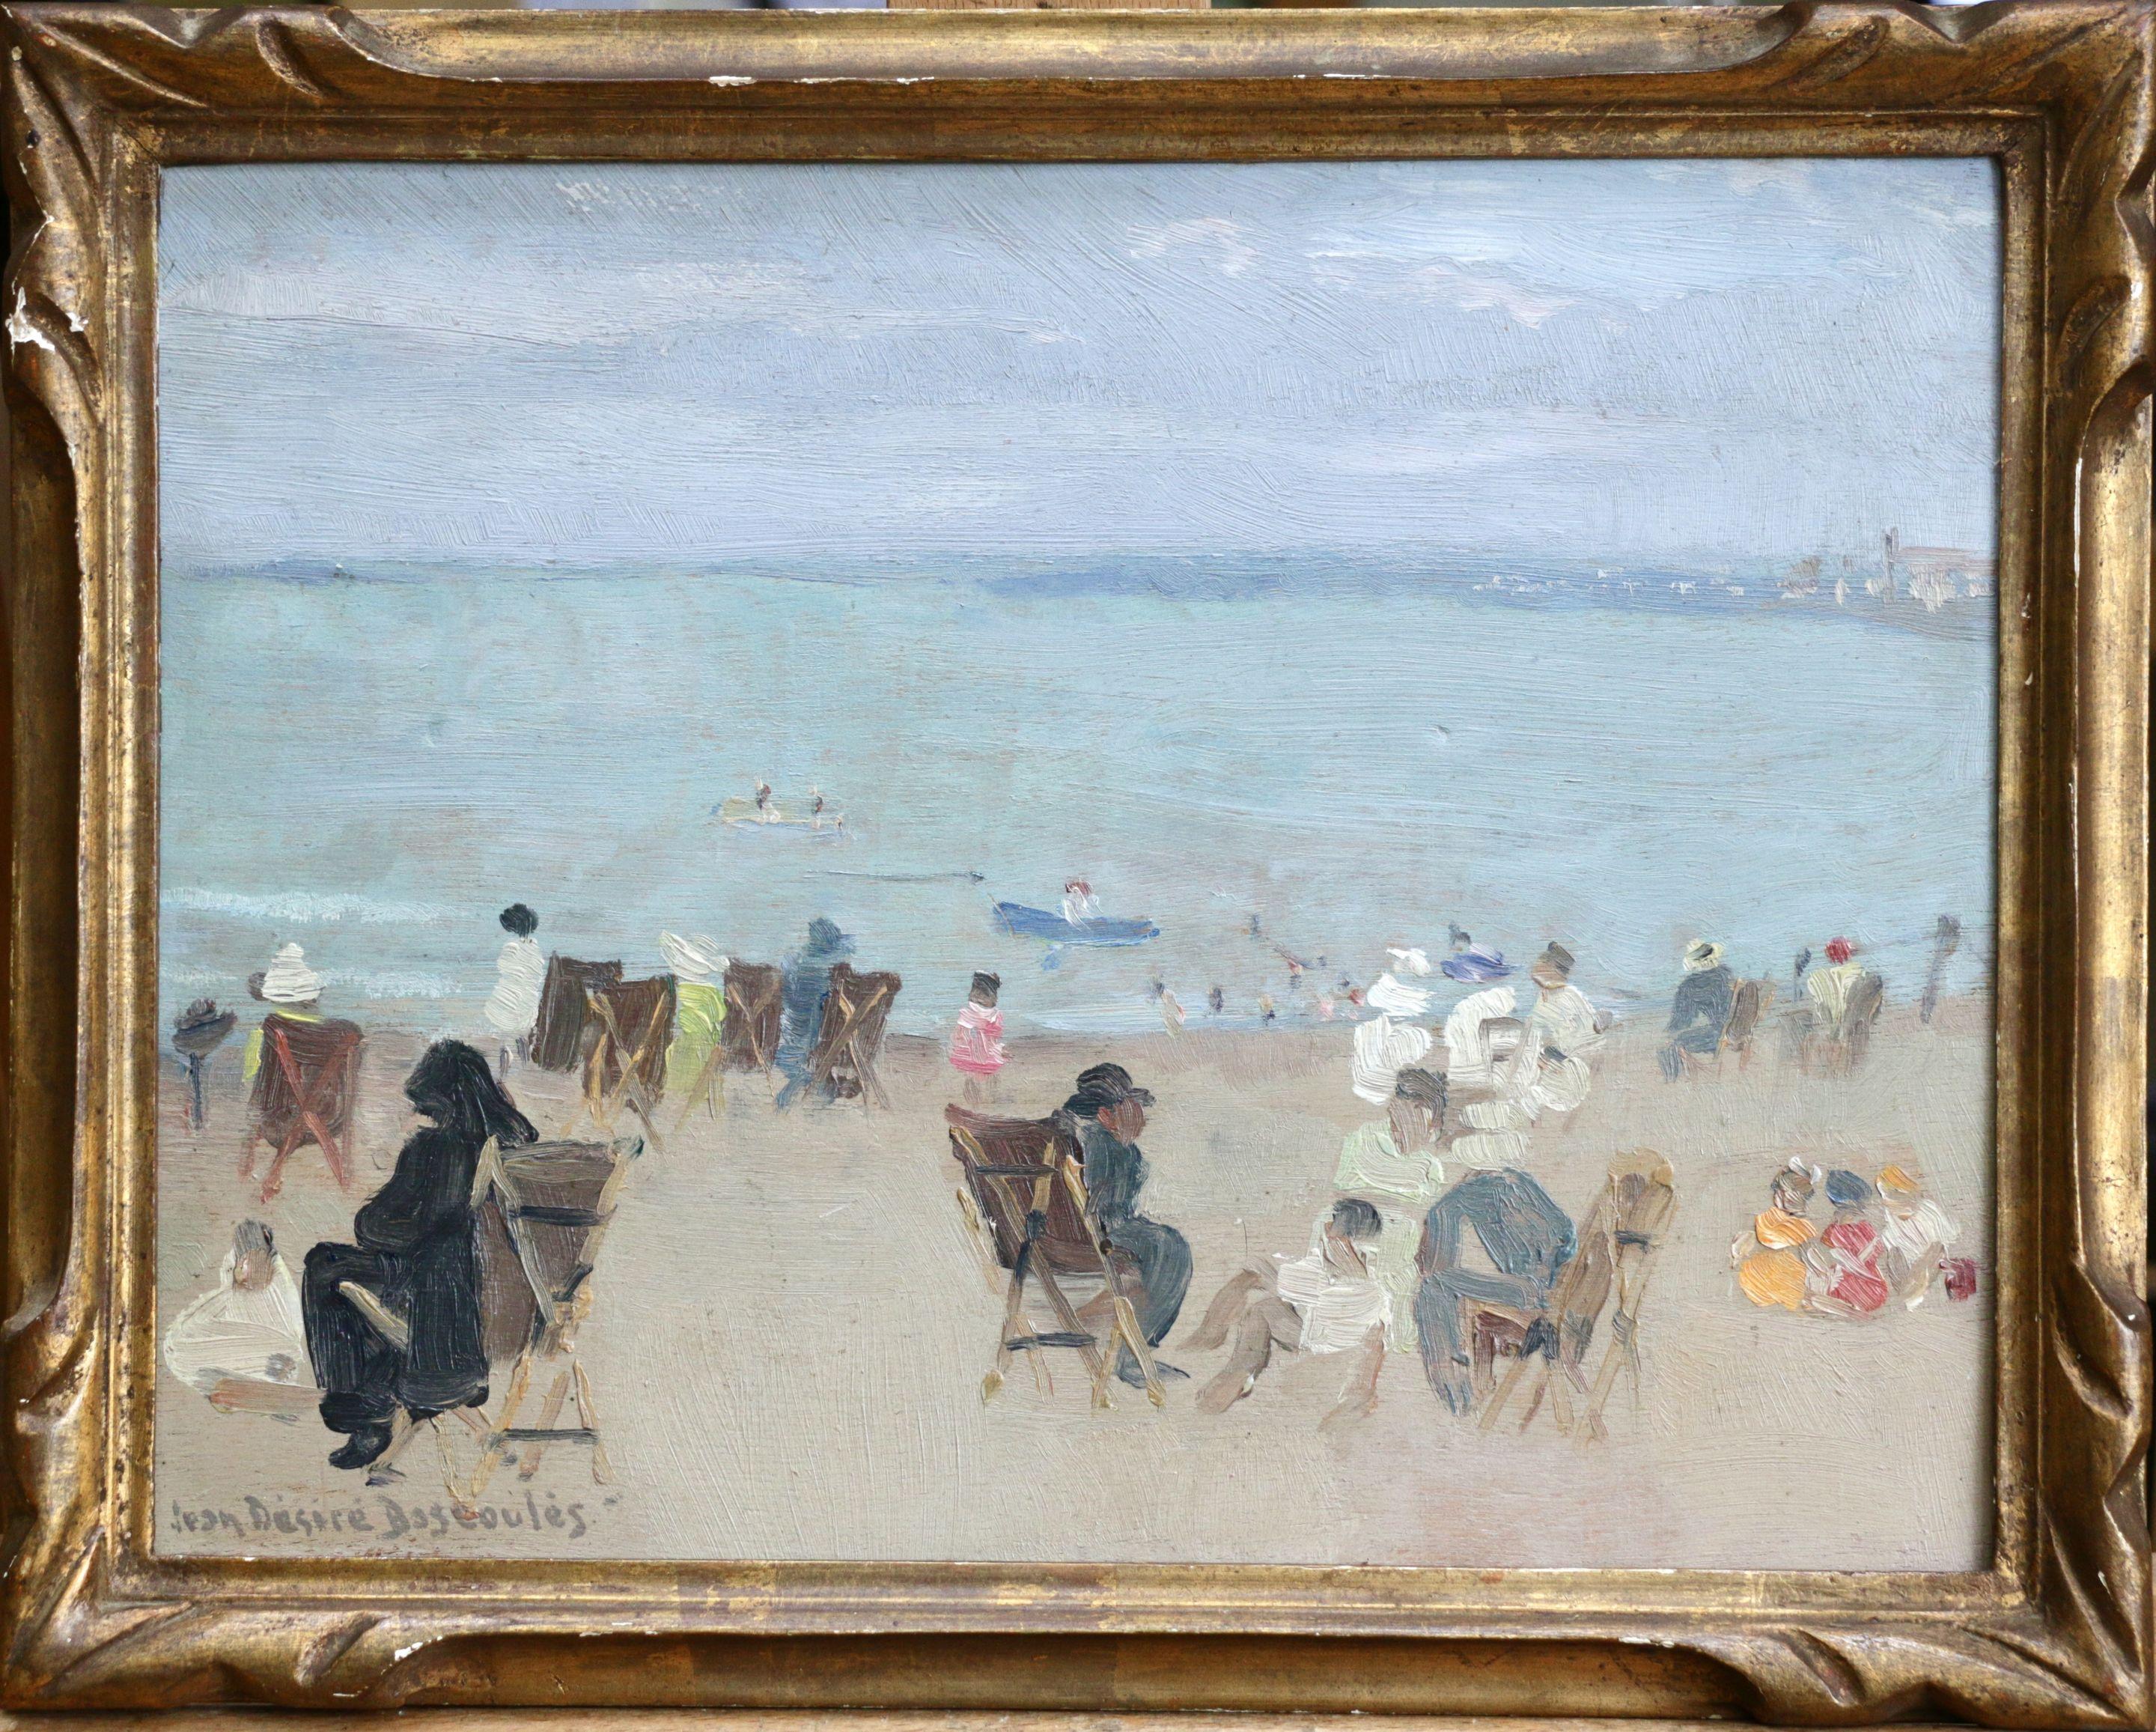 Plage Alger - Soir - Mid 20th Century Oil, Figures on Beach by Jean Bascoulles - Painting by Jean Desire Bascoules